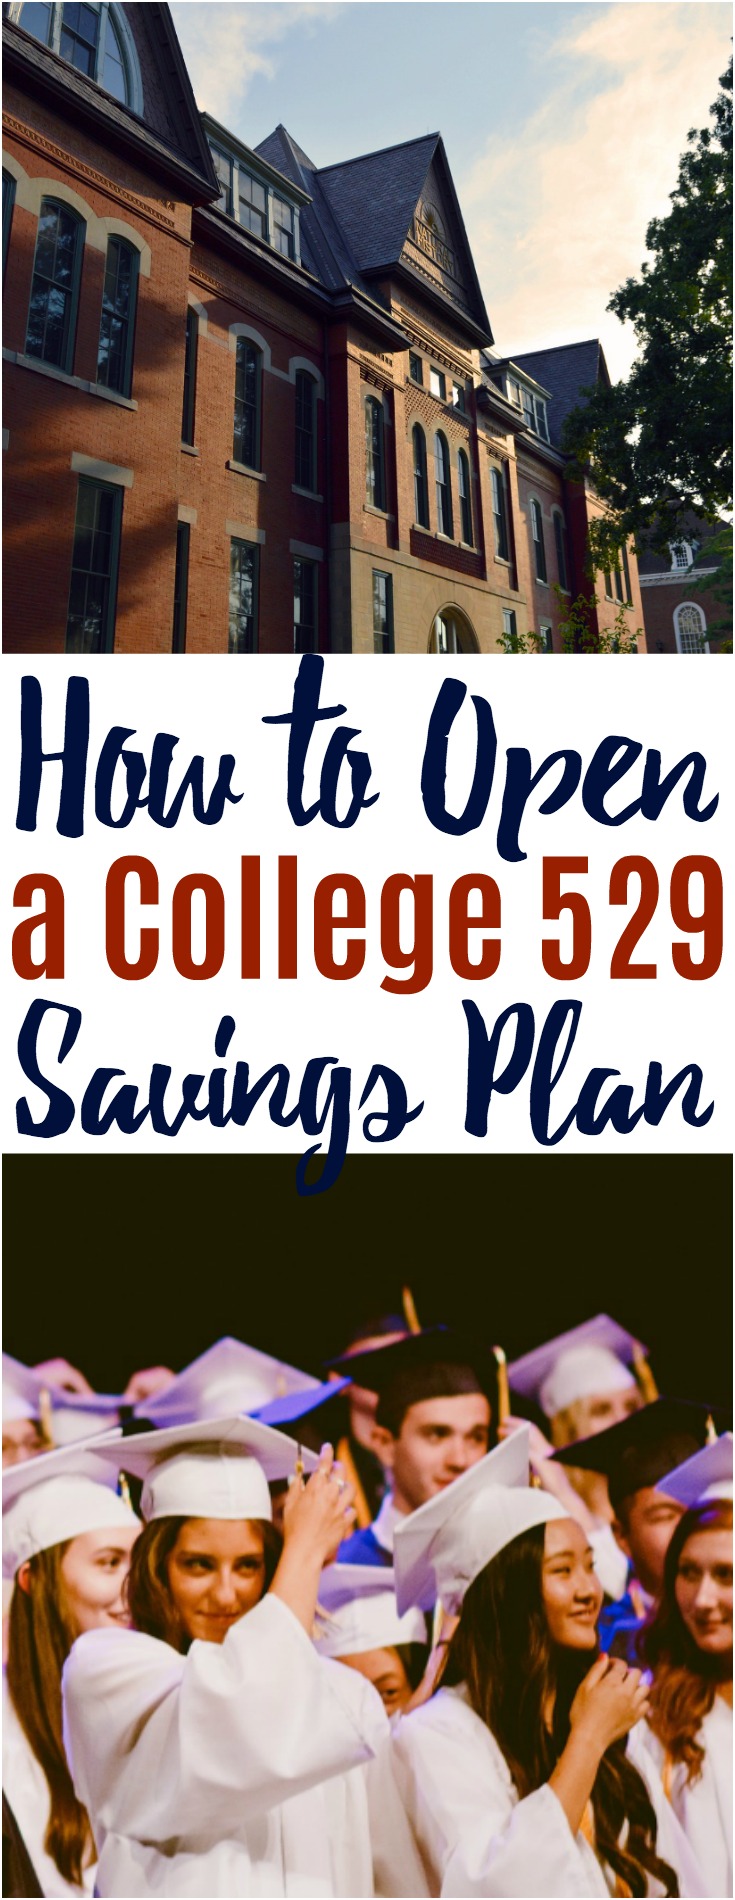 A College 529 plan is a wonderful vehicle to help you save for your child's college. Take these 5 simple steps to help you open a College 529 plan for your child and start saving. #collegesavings #finance #529plan #budget #finance #savingmoney #investing